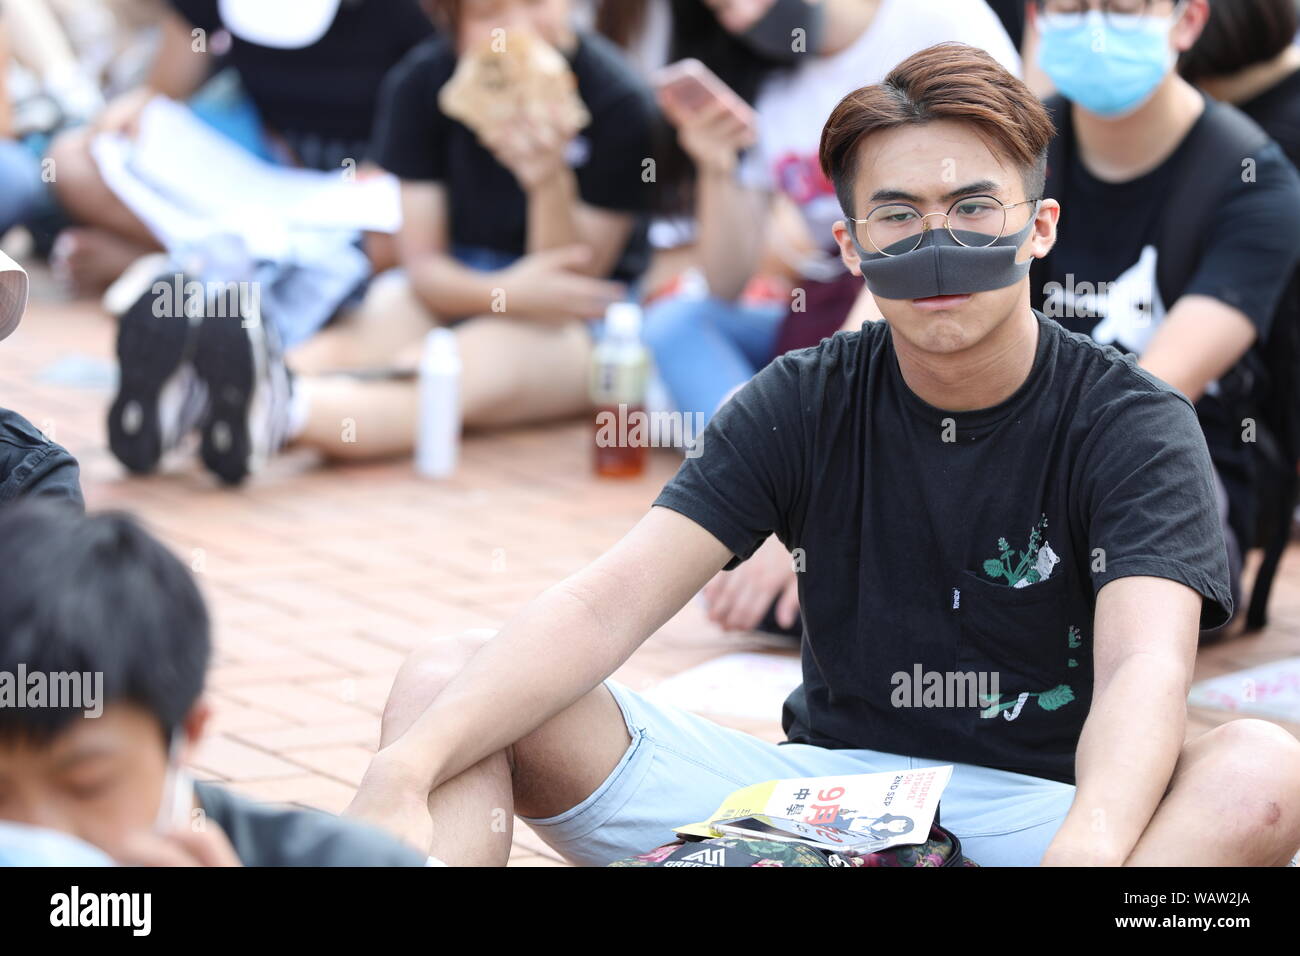 Hong Kong. 22nd Aug, 2019. 22nd August 2019. Hong Kong Secondary School Students Anti Extradition Bill protest in Central Hong Kong. Many hundreds of secondary school gathered for a rally in the blazing hot sun in support of Anti Extradition Bill protests which have been ongoing throughout Hong Kong for the past couple of months. Credit: David Coulson/Alamy Live News Stock Photo